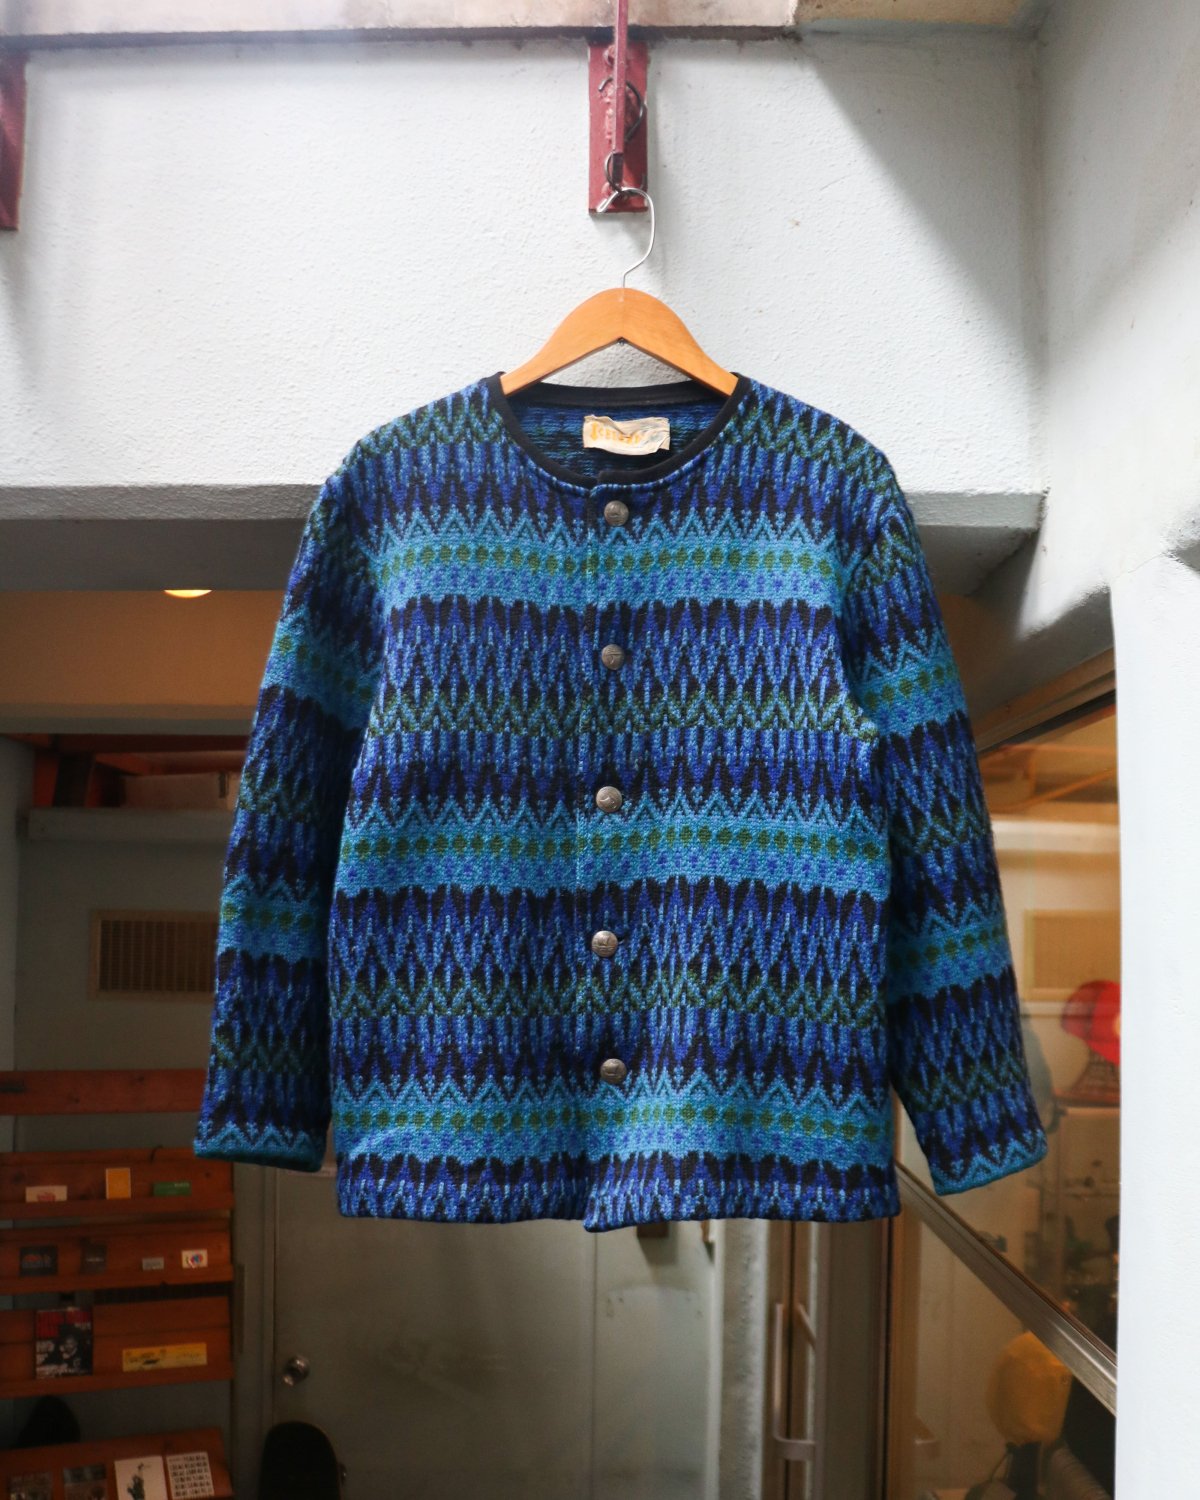 “ICELAND FROM jersey modeller of Sweden” Lambs Wool Nordic Cardigan (Made in Sweden)